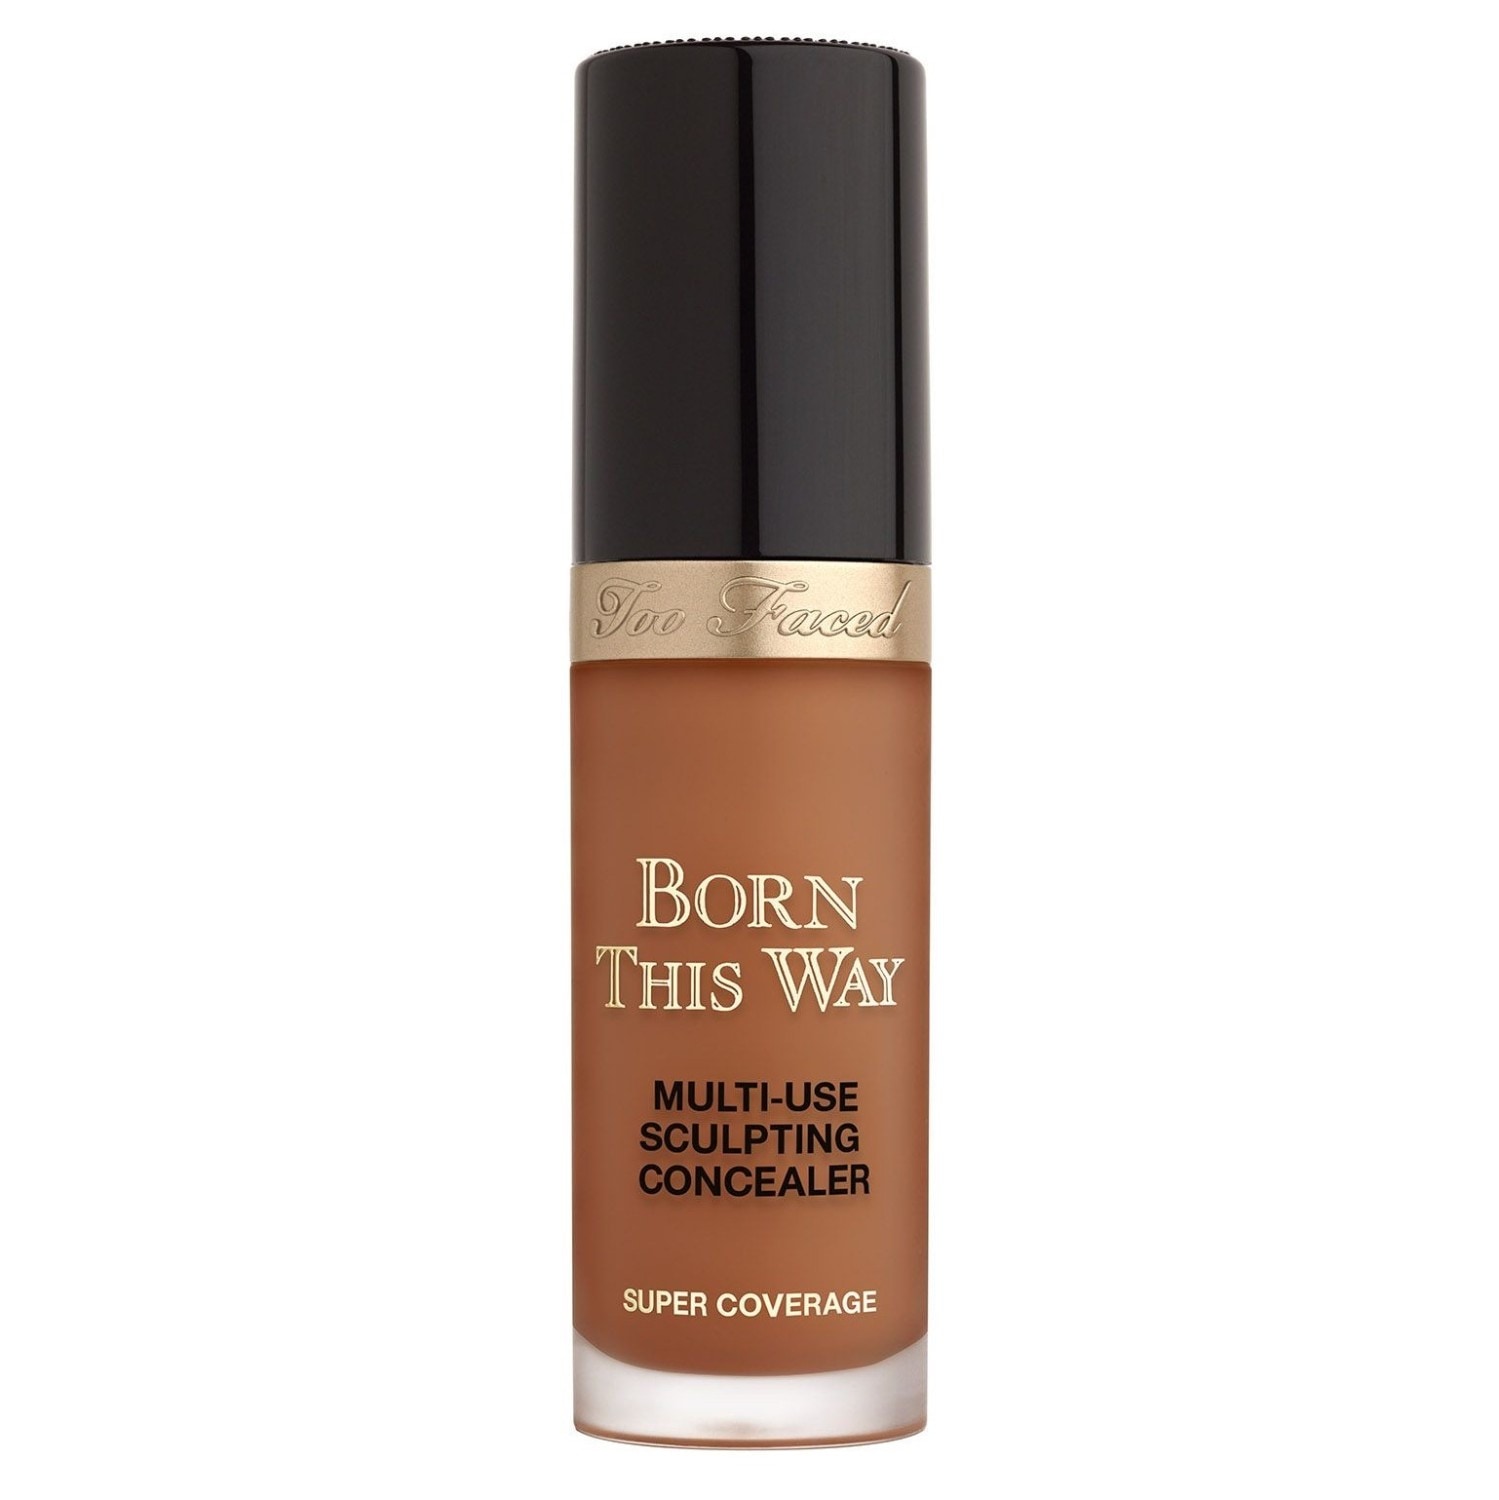 Too Faced Born This Way Super Coverage Concealer,Spiced Rum, Spiced Rum